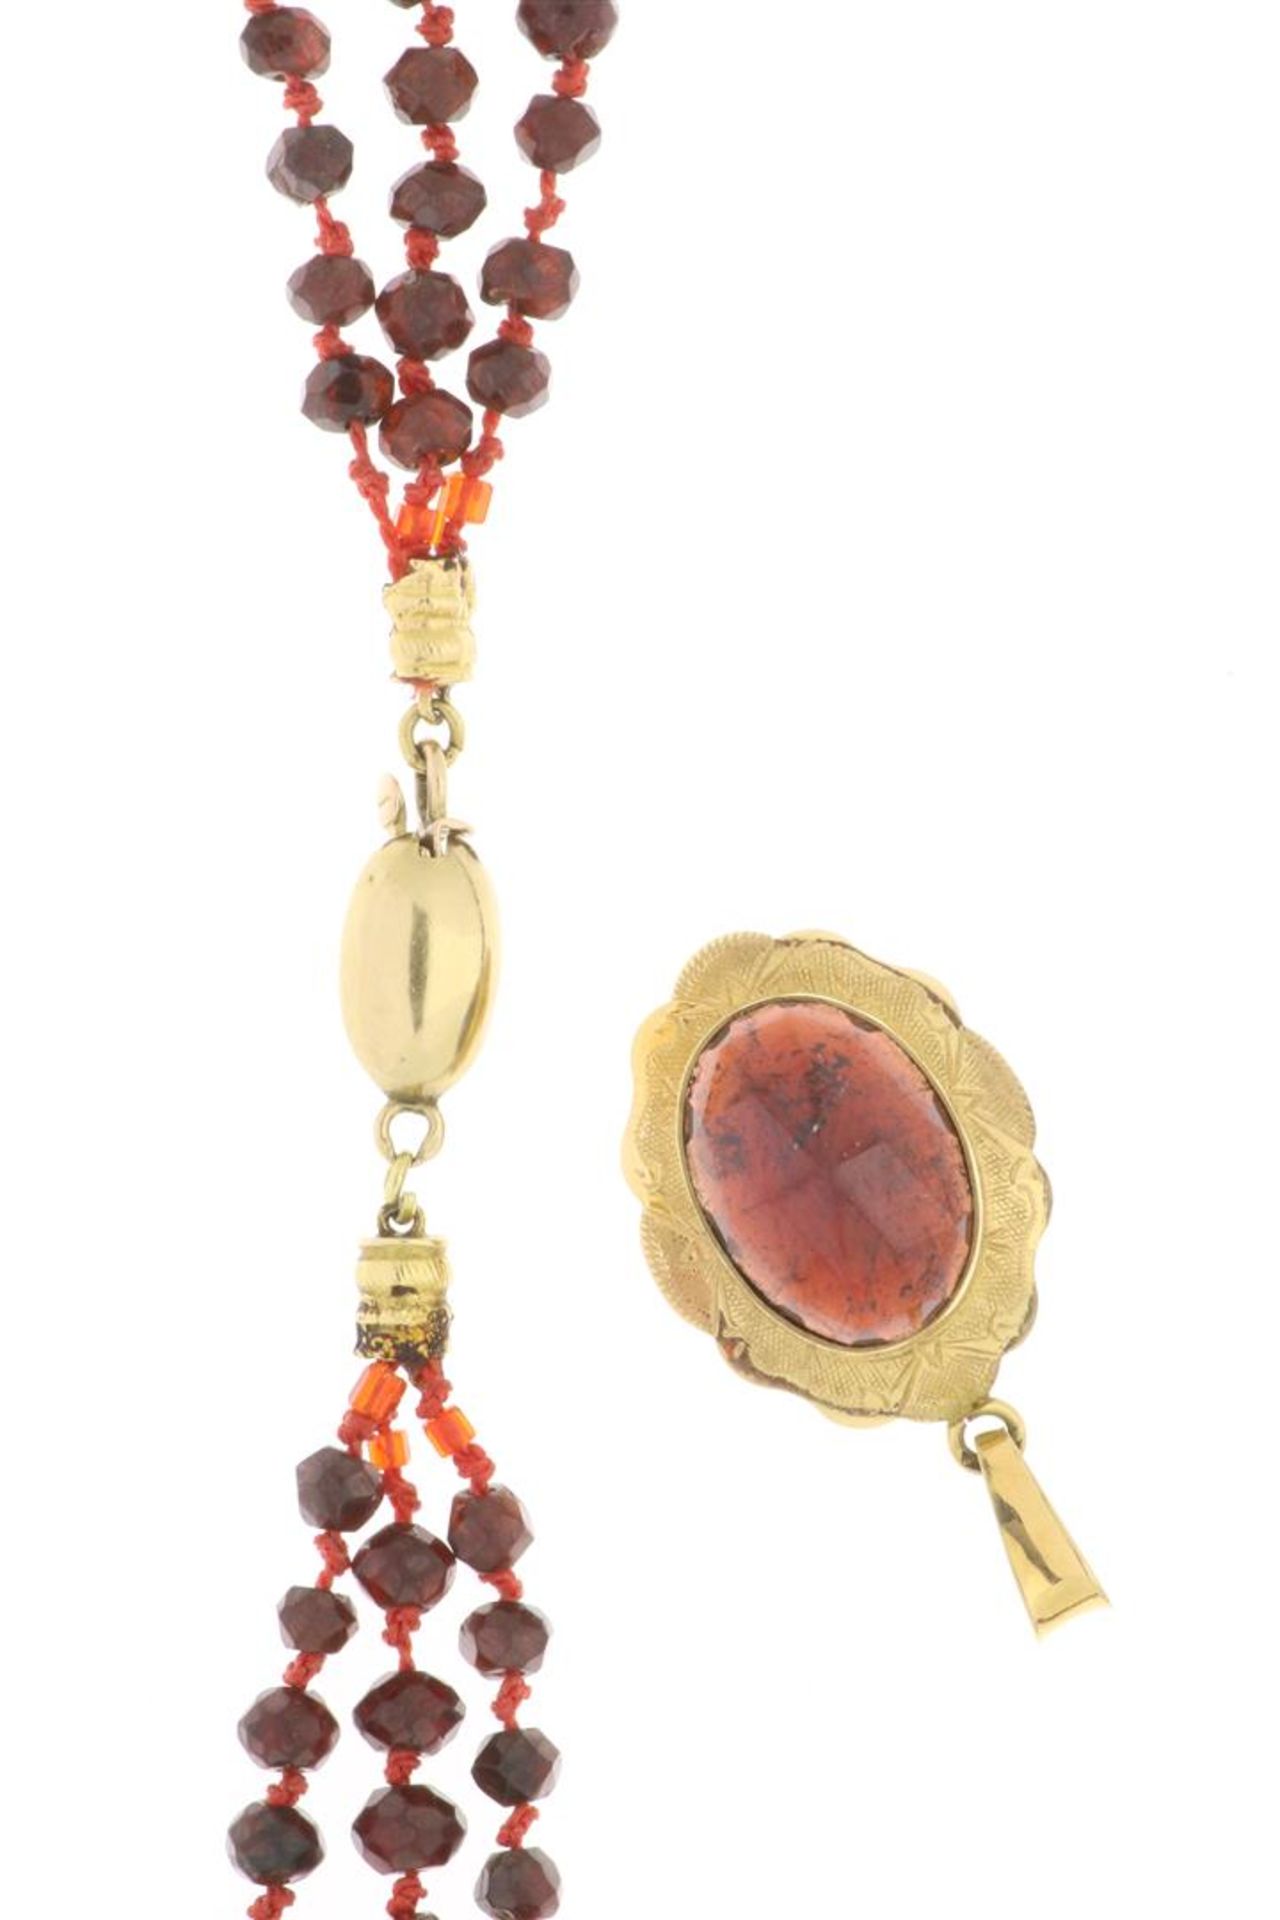 Garnet necklace with 14 carat gold clasp and a 14 carat gold pendant with oval cut garnet.